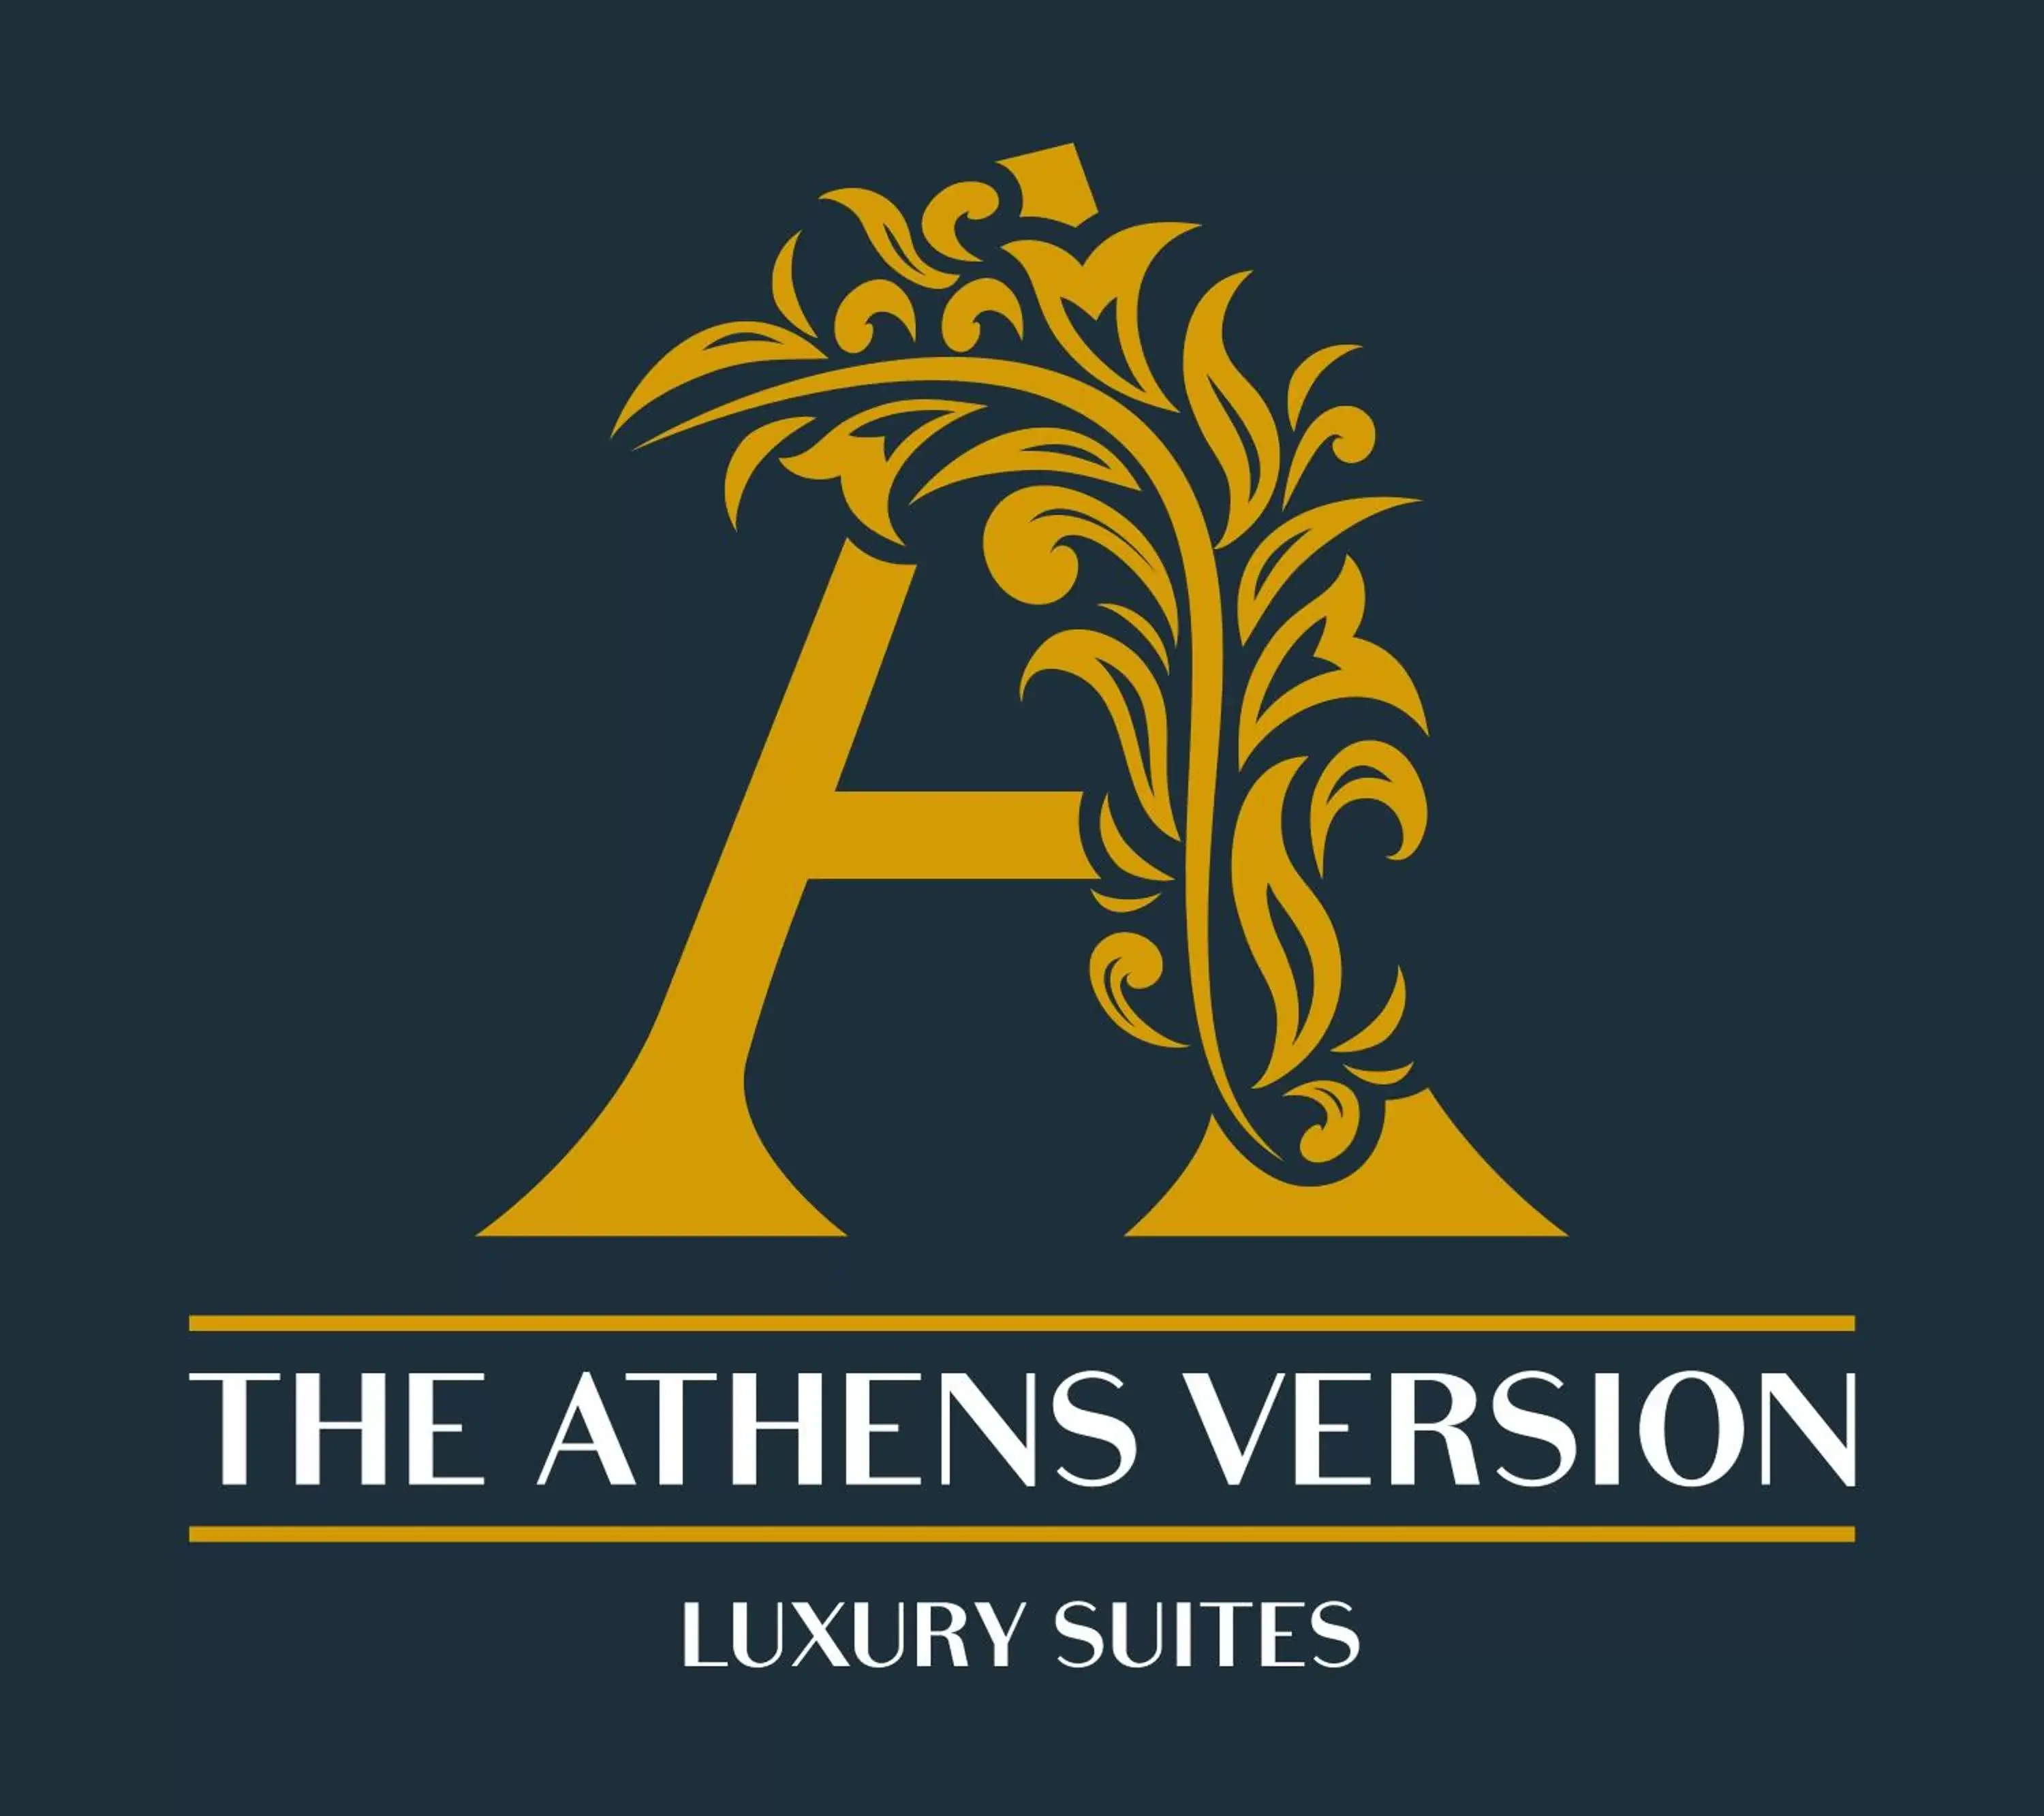 Property logo or sign, Property Logo/Sign in The Athens Version Luxury Suites